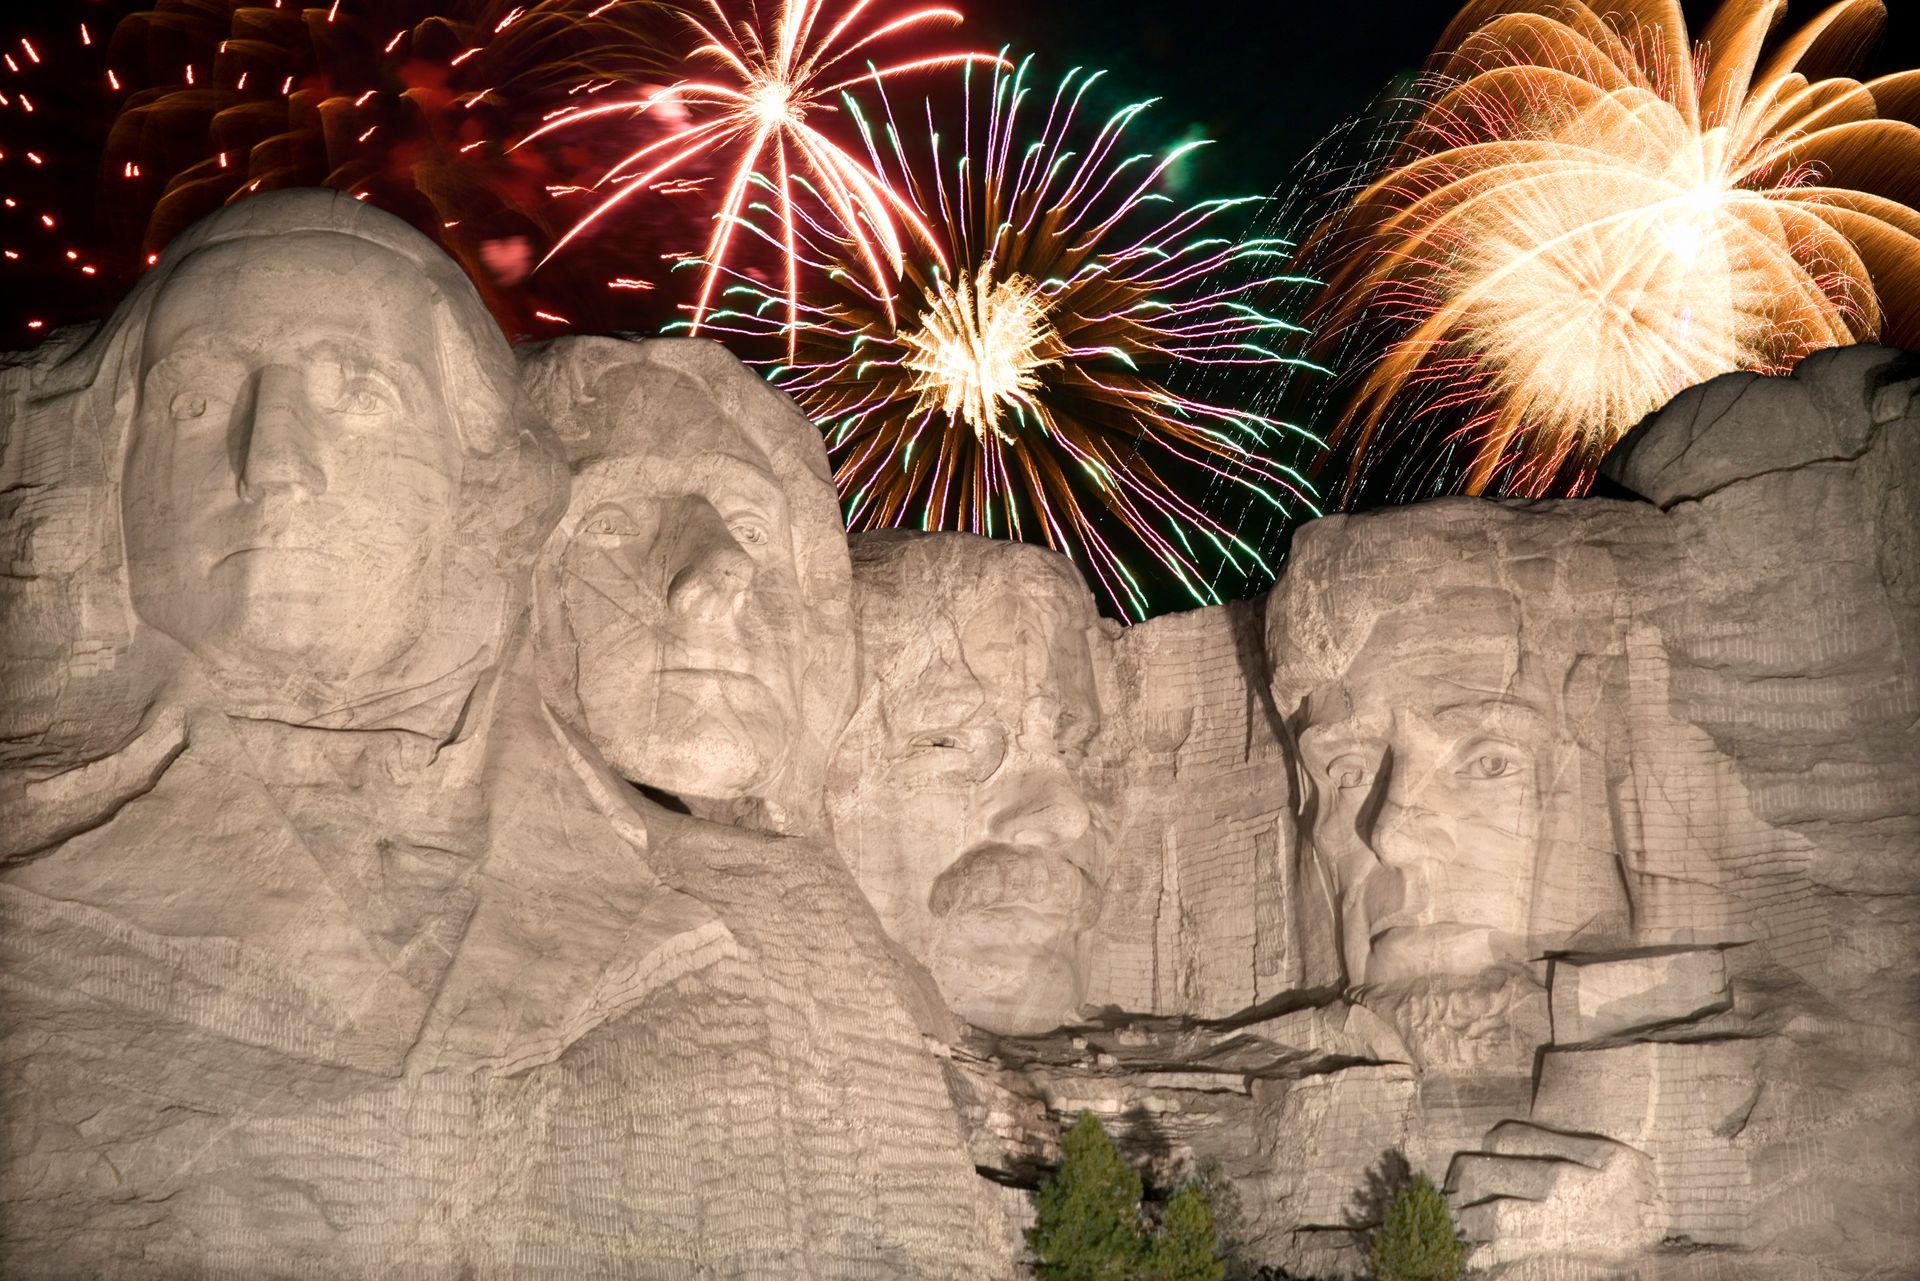 A statue of the presidents of the united states with fireworks in the background